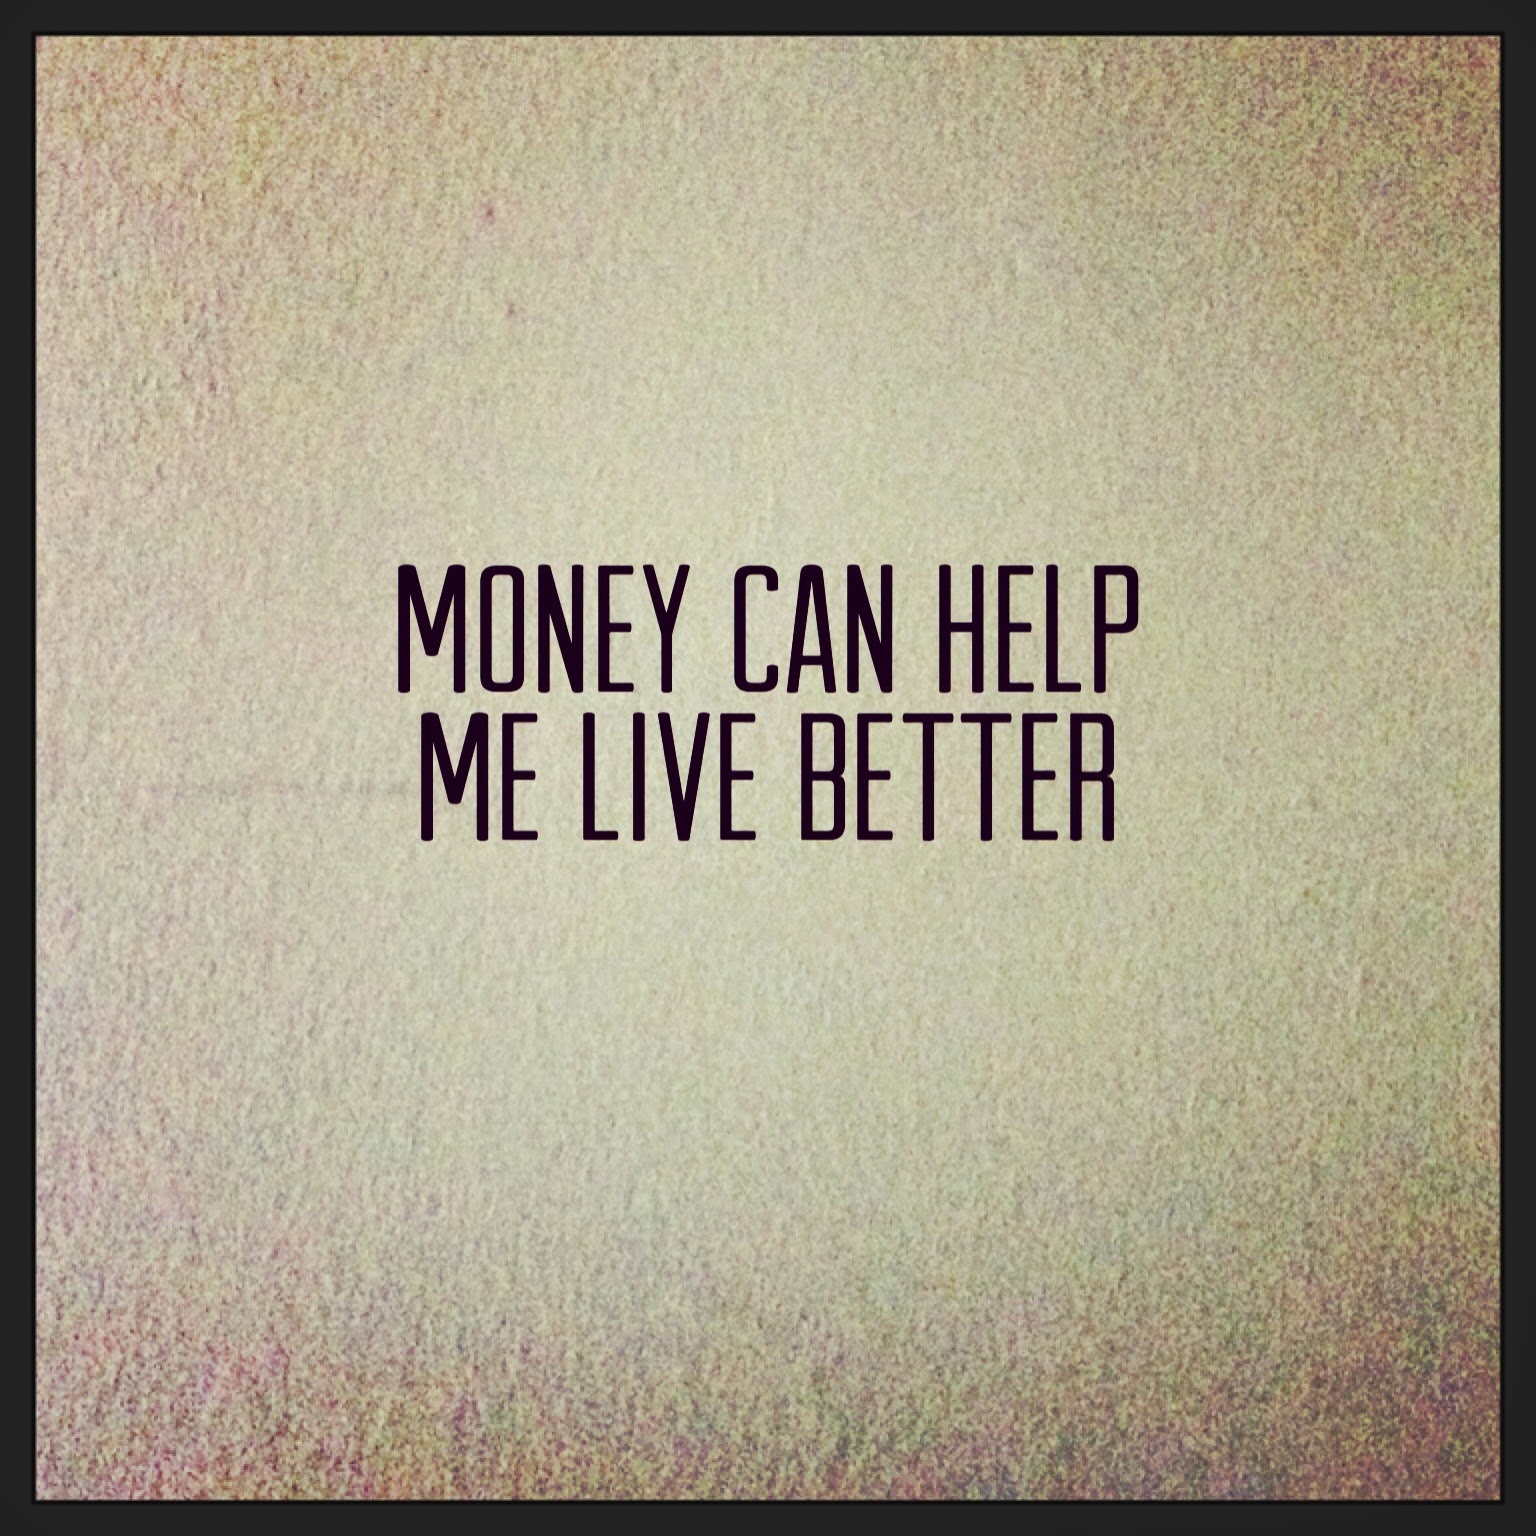 Money can help me live better